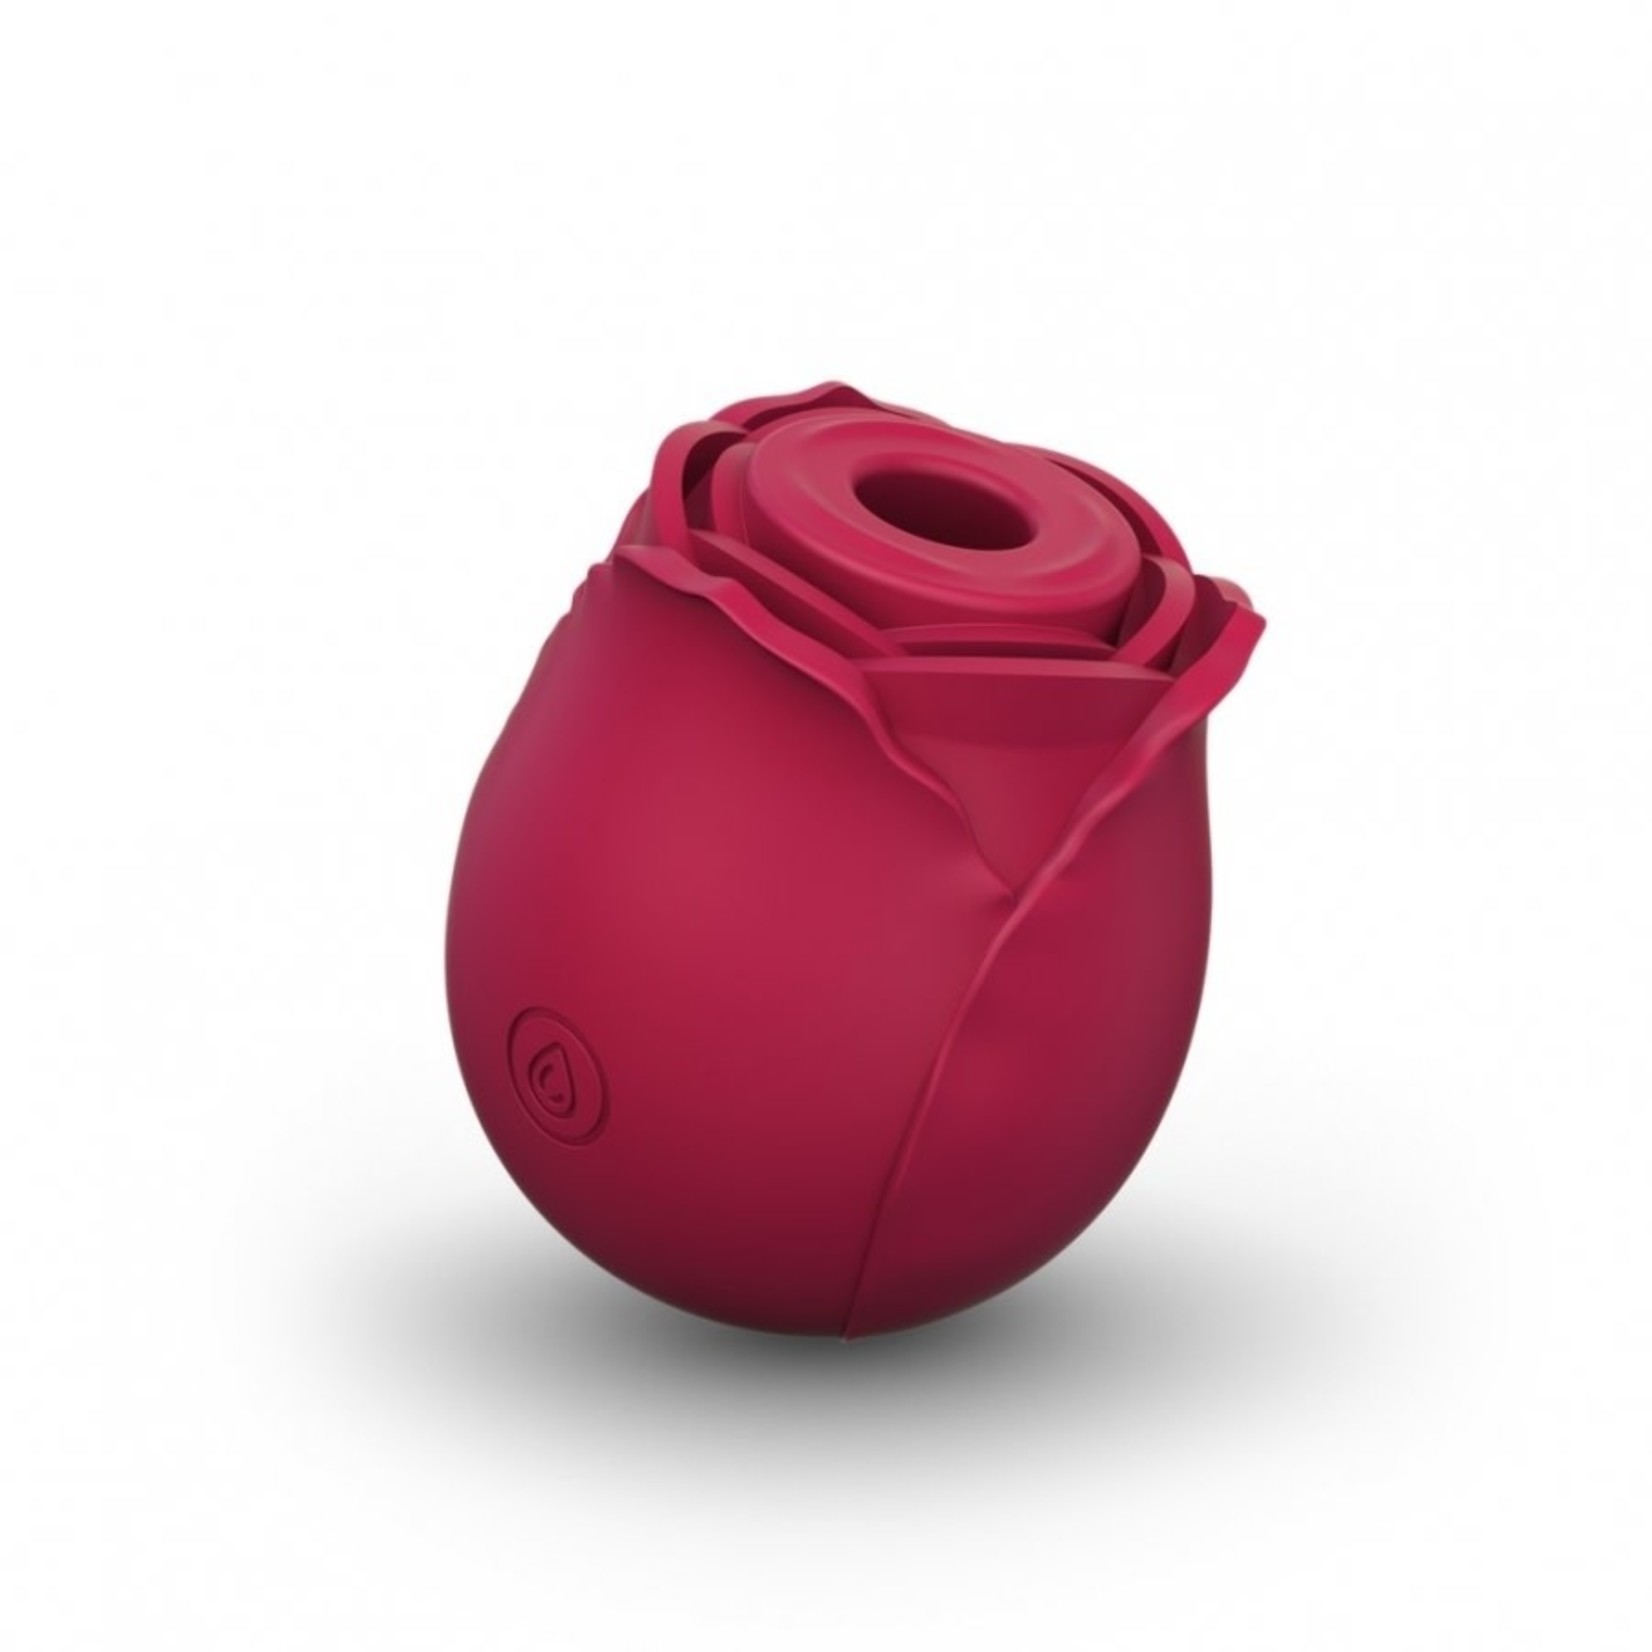 TRACY'S DOG TRACY'S DOG - ROSE VIBRATOR - RED